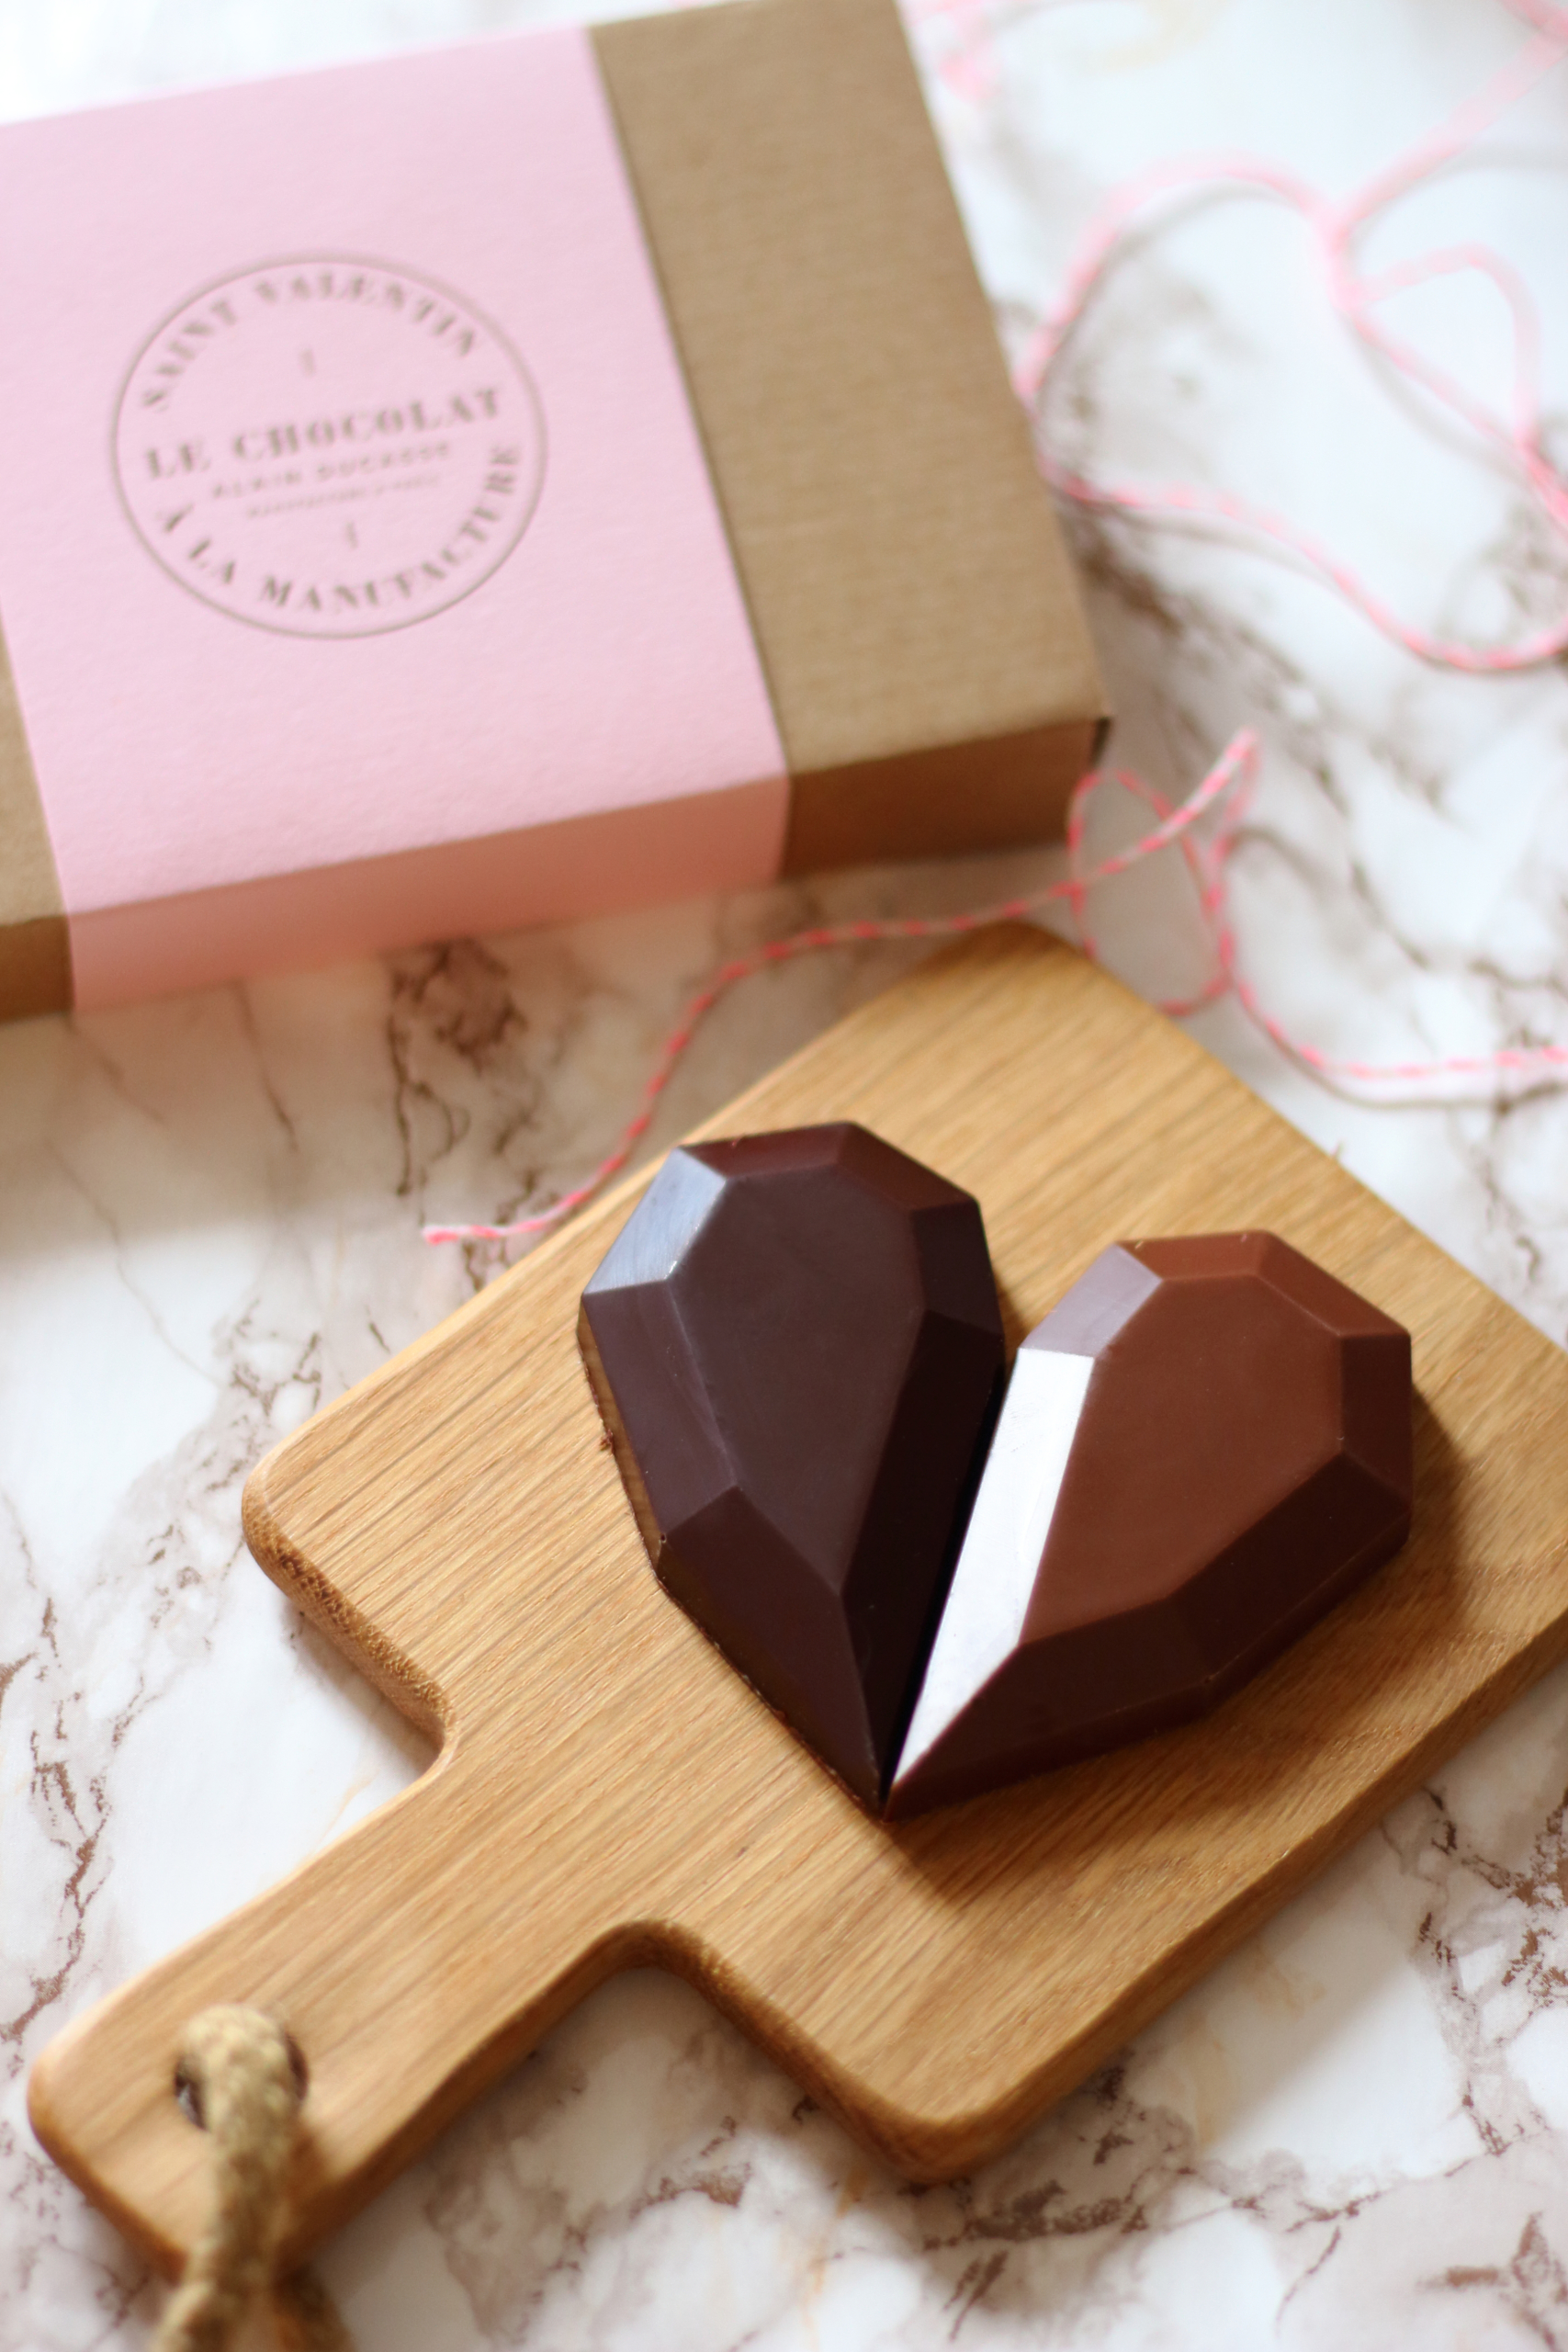 A heart to share Le Chocolat Alain Ducasse